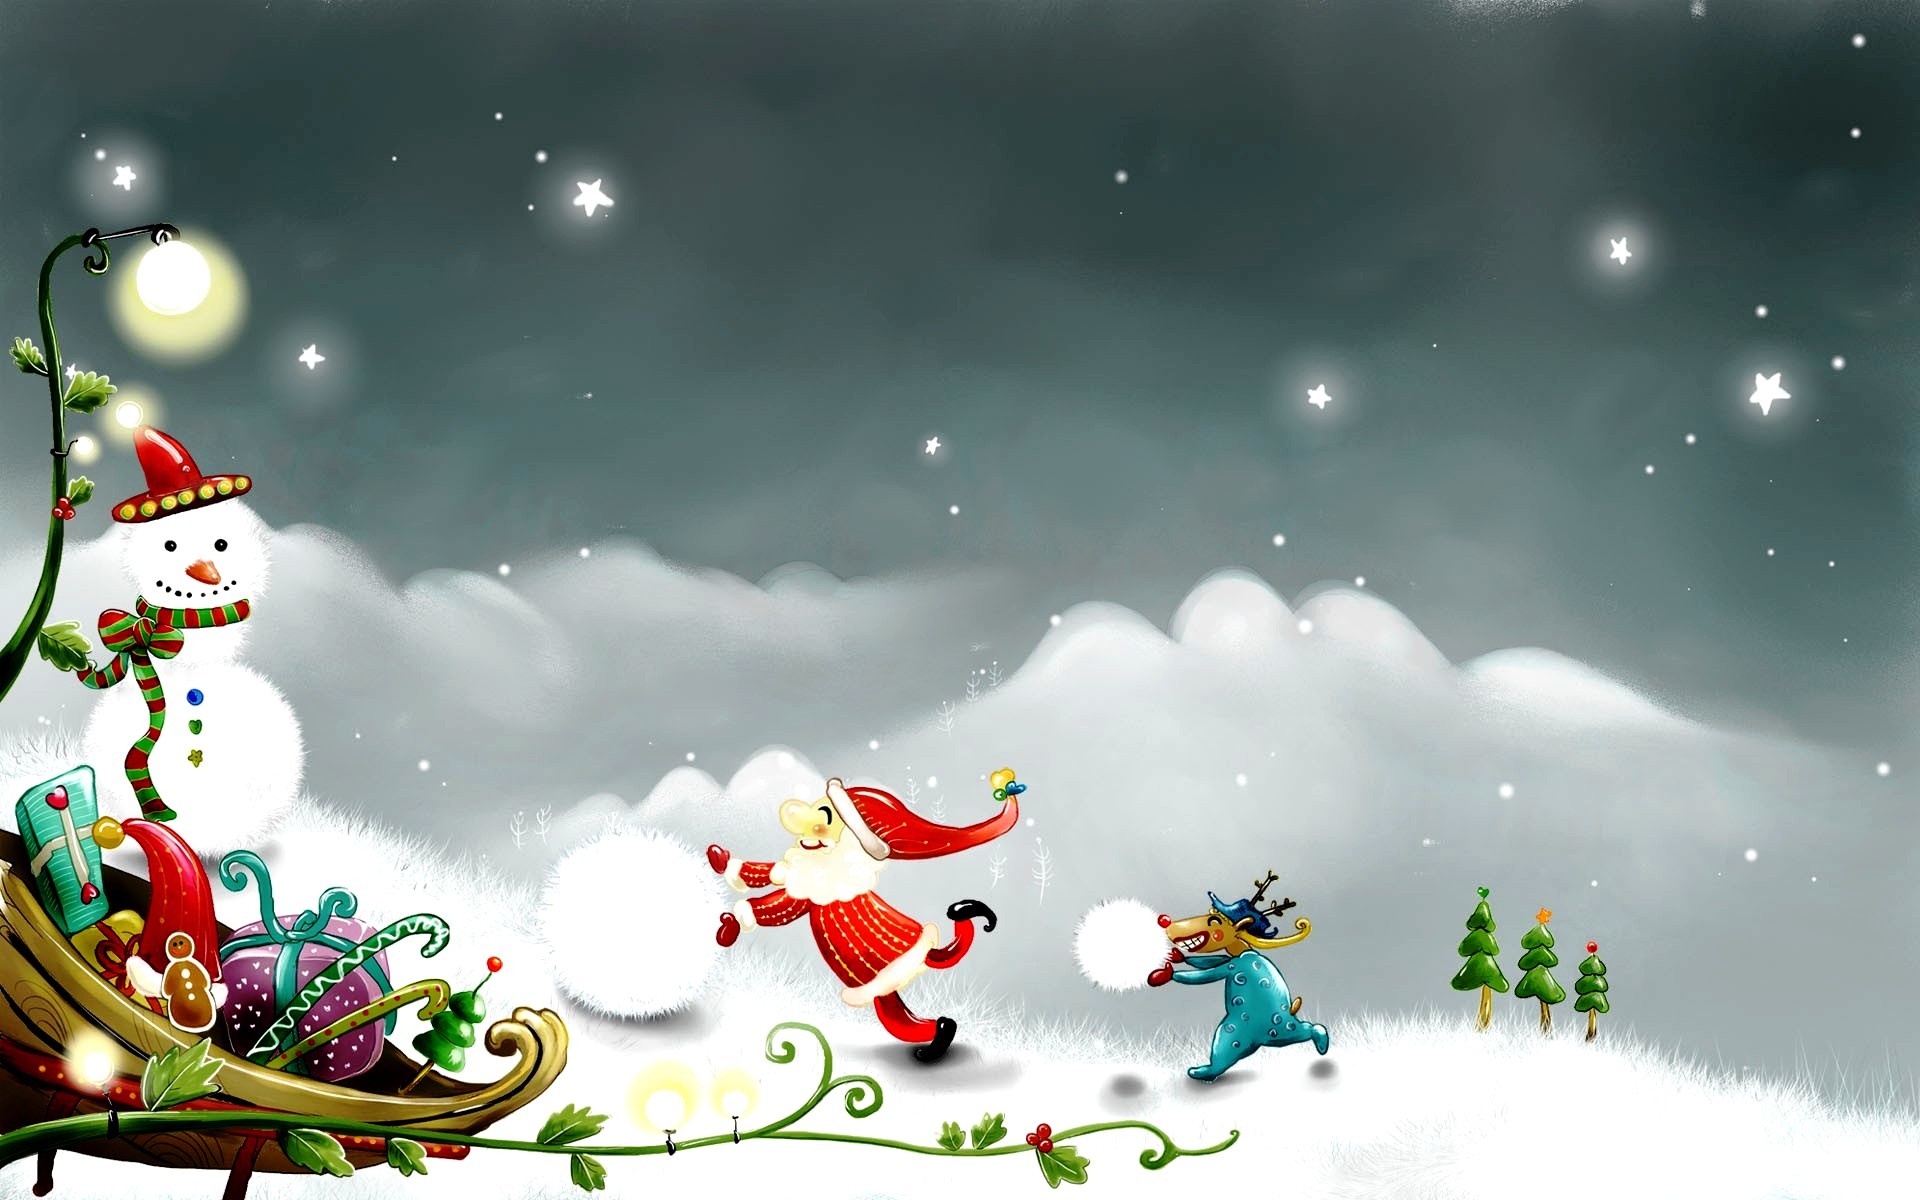 1920x1200 Easy Steps To Find Animated Christmas Wallpapers Free Download : Wallpapers  for Desktop with winter,